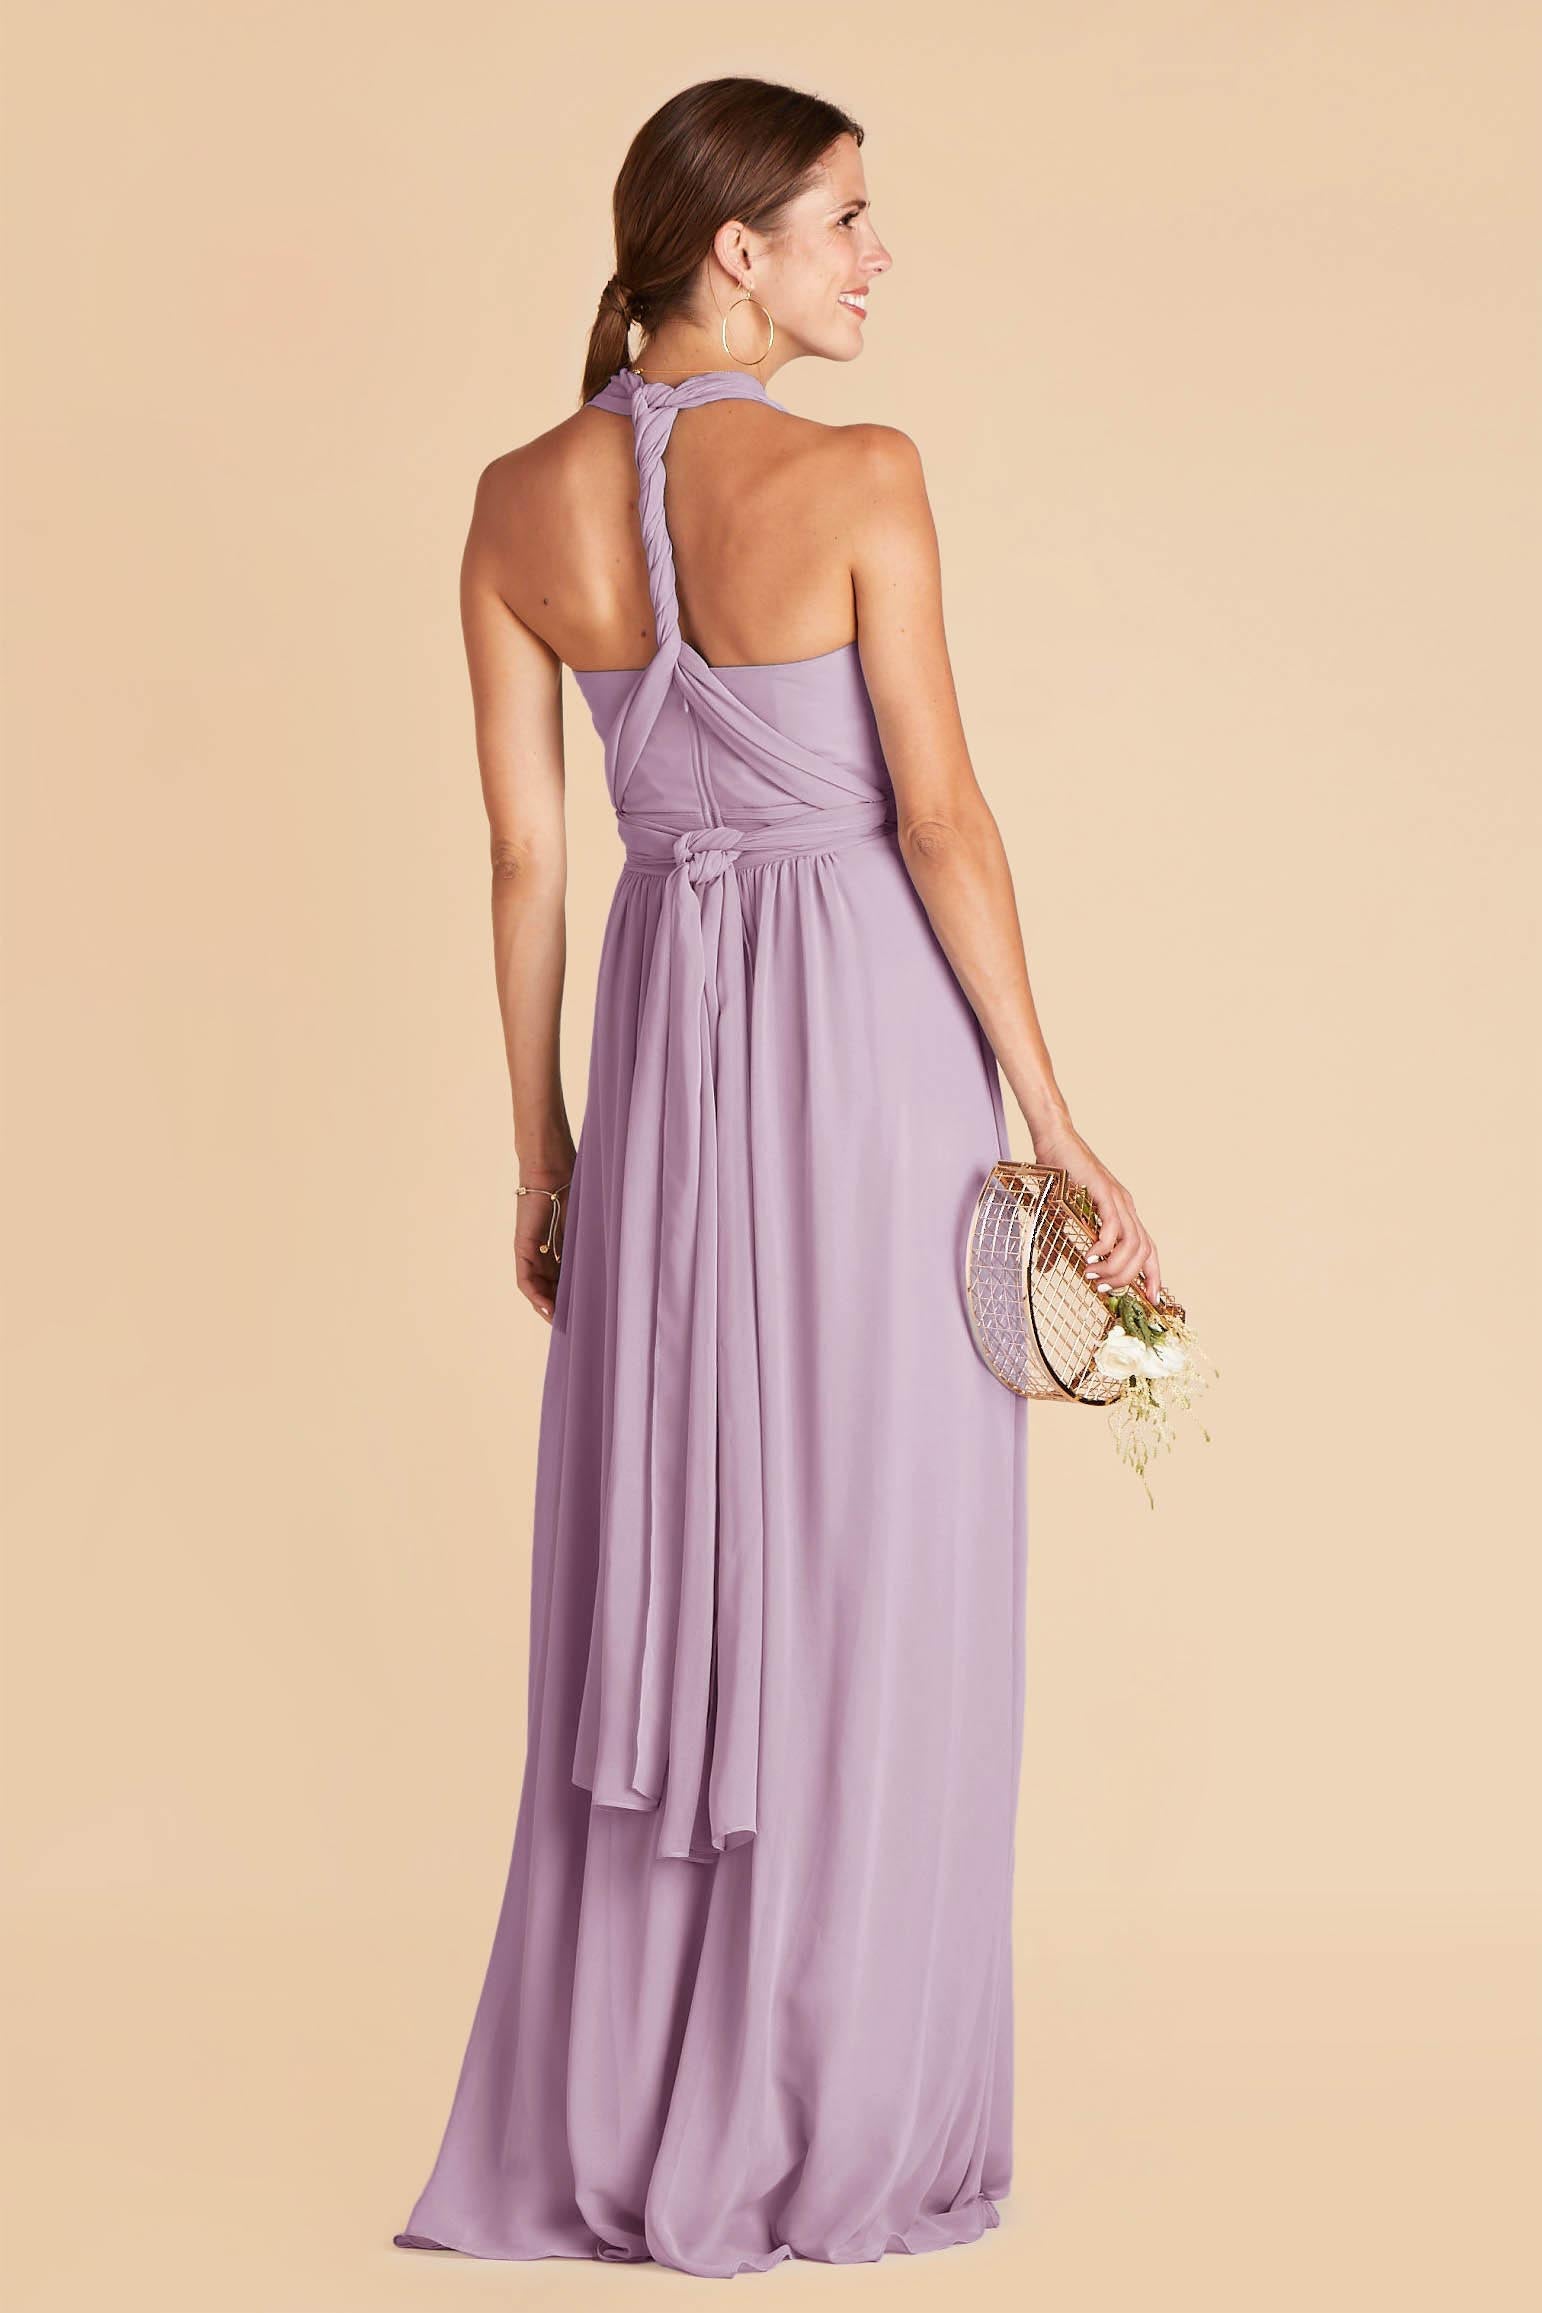 Grace convertible bridesmaid dress in Lavender Chiffon by Birdy Grey